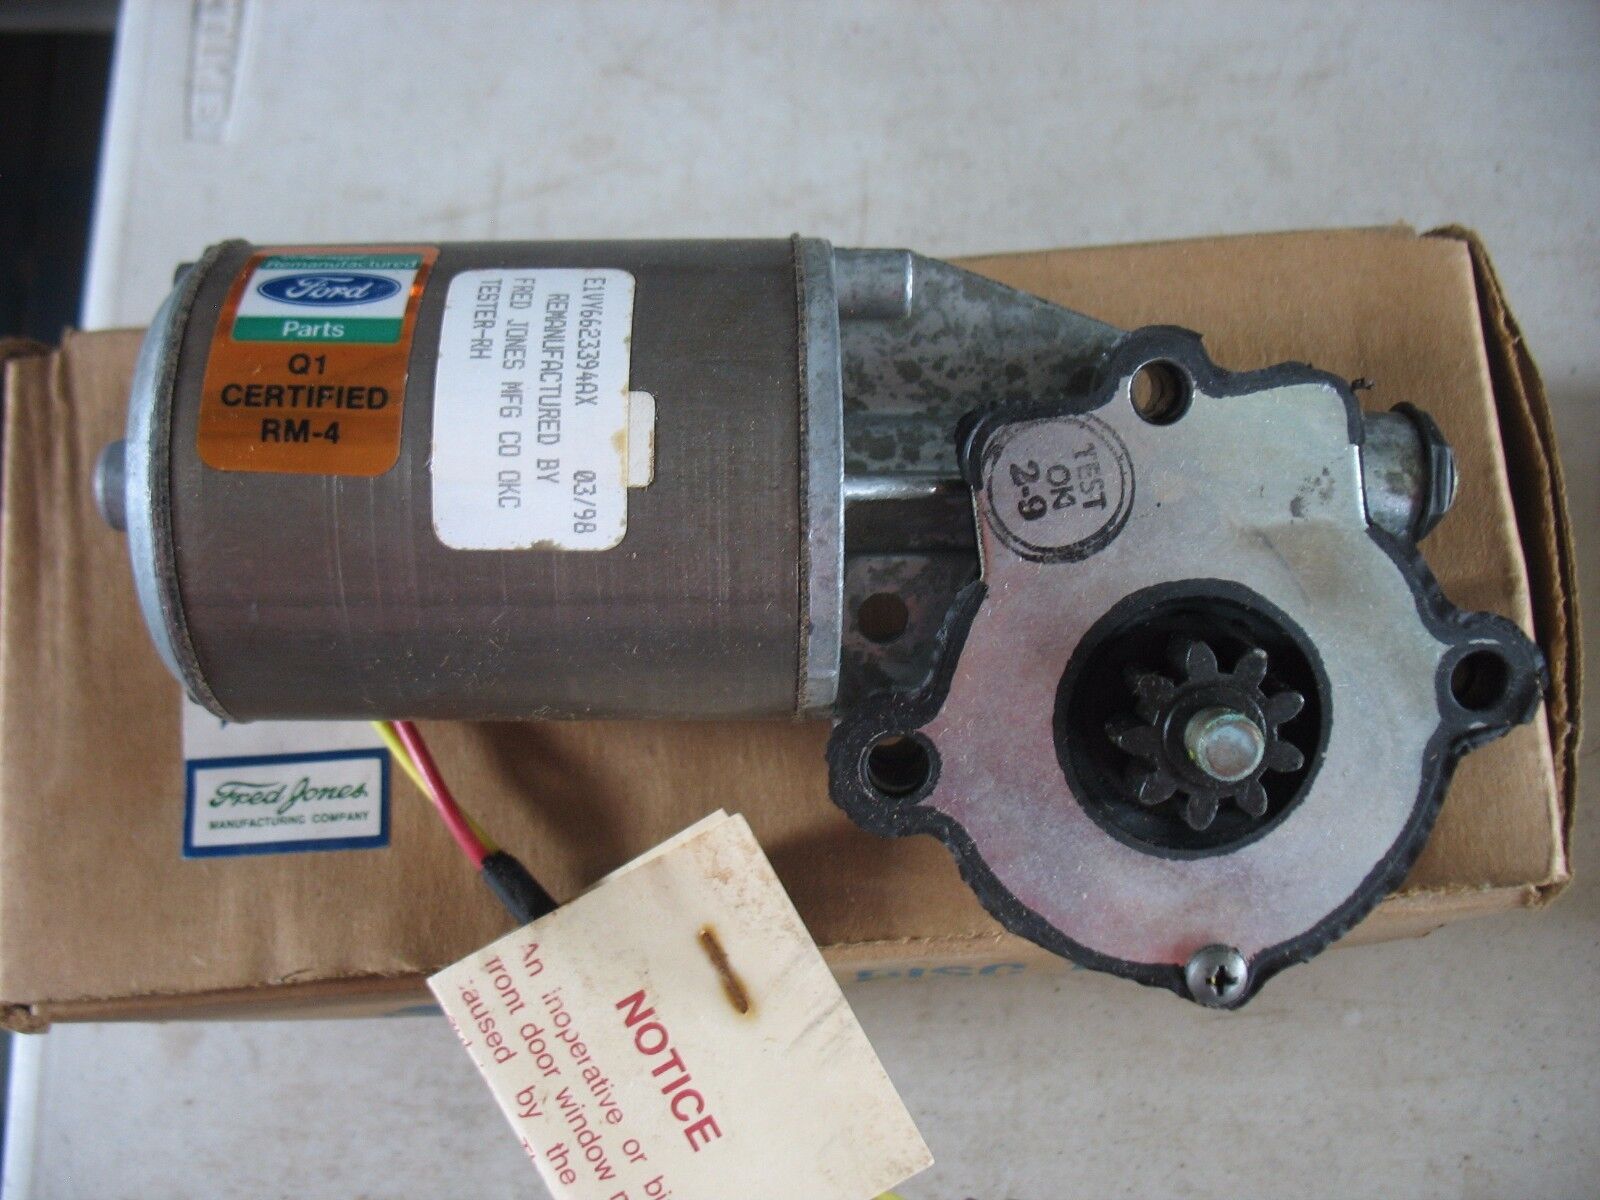 Remanufactured OEM Ford Power Window Lift Motor E1VY6623394AX